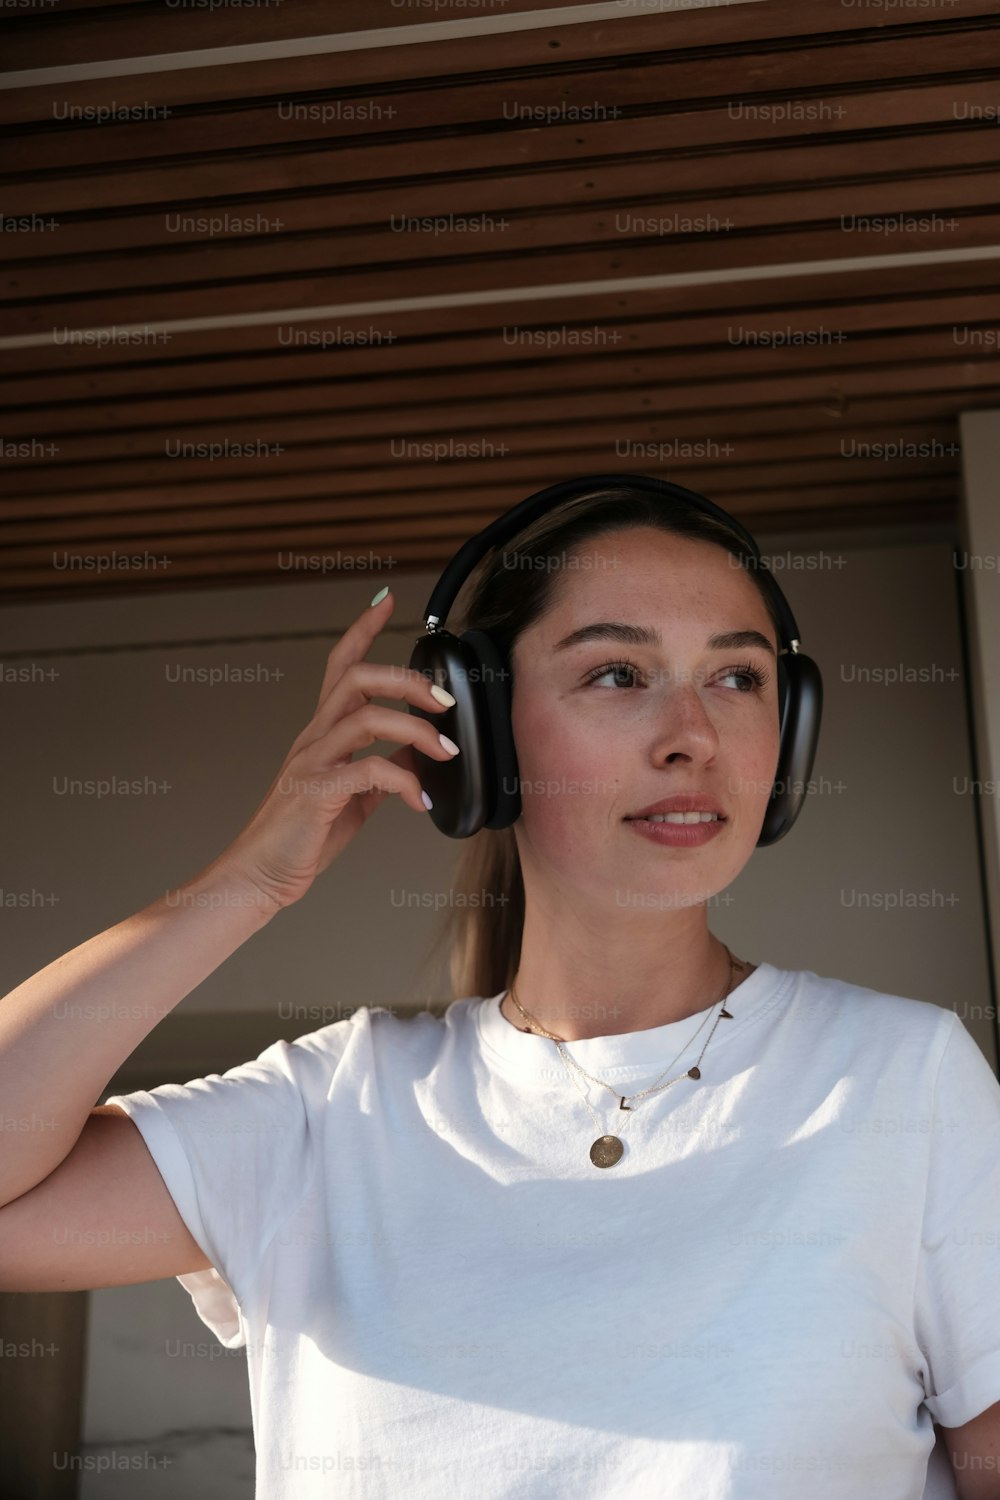 a woman wearing headphones and a white shirt